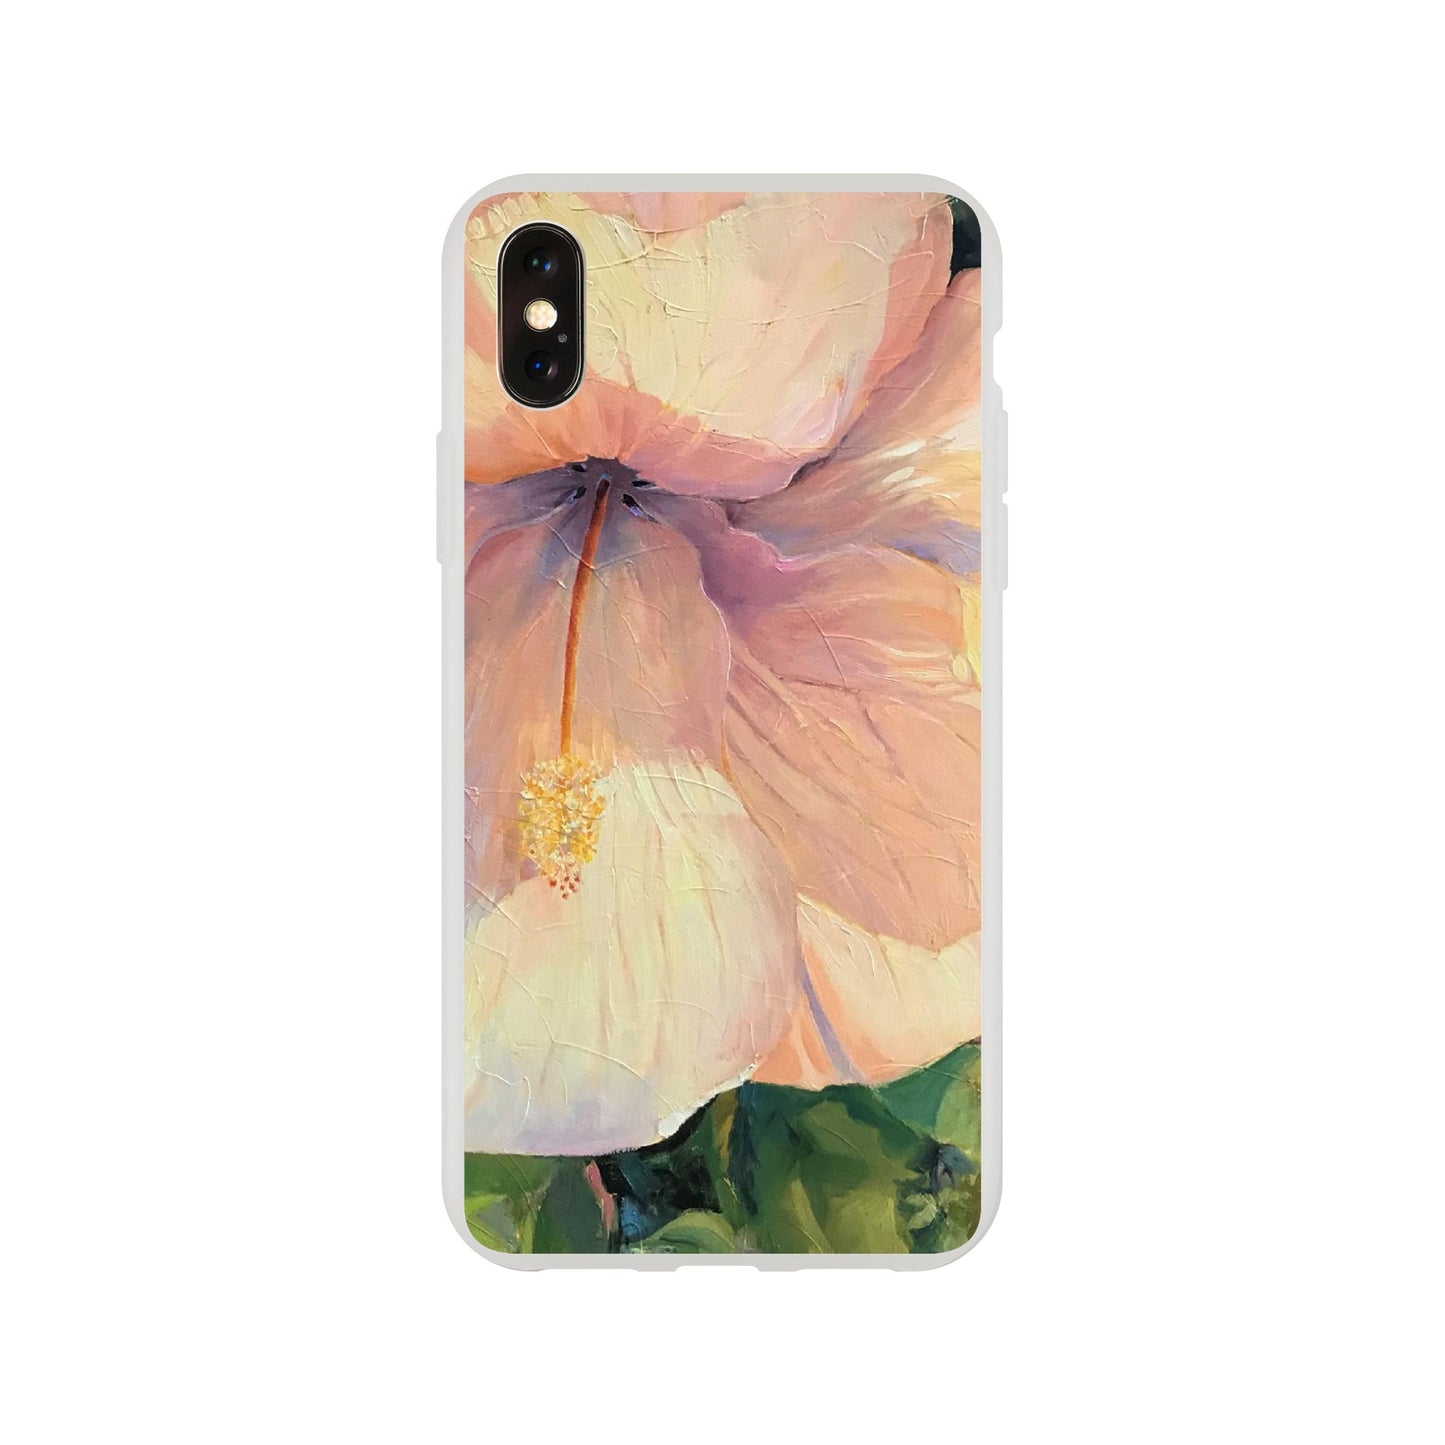 "Hibiscus" Flexi Phone Case for Iphone or Samsung by Barbara Cleary Designs